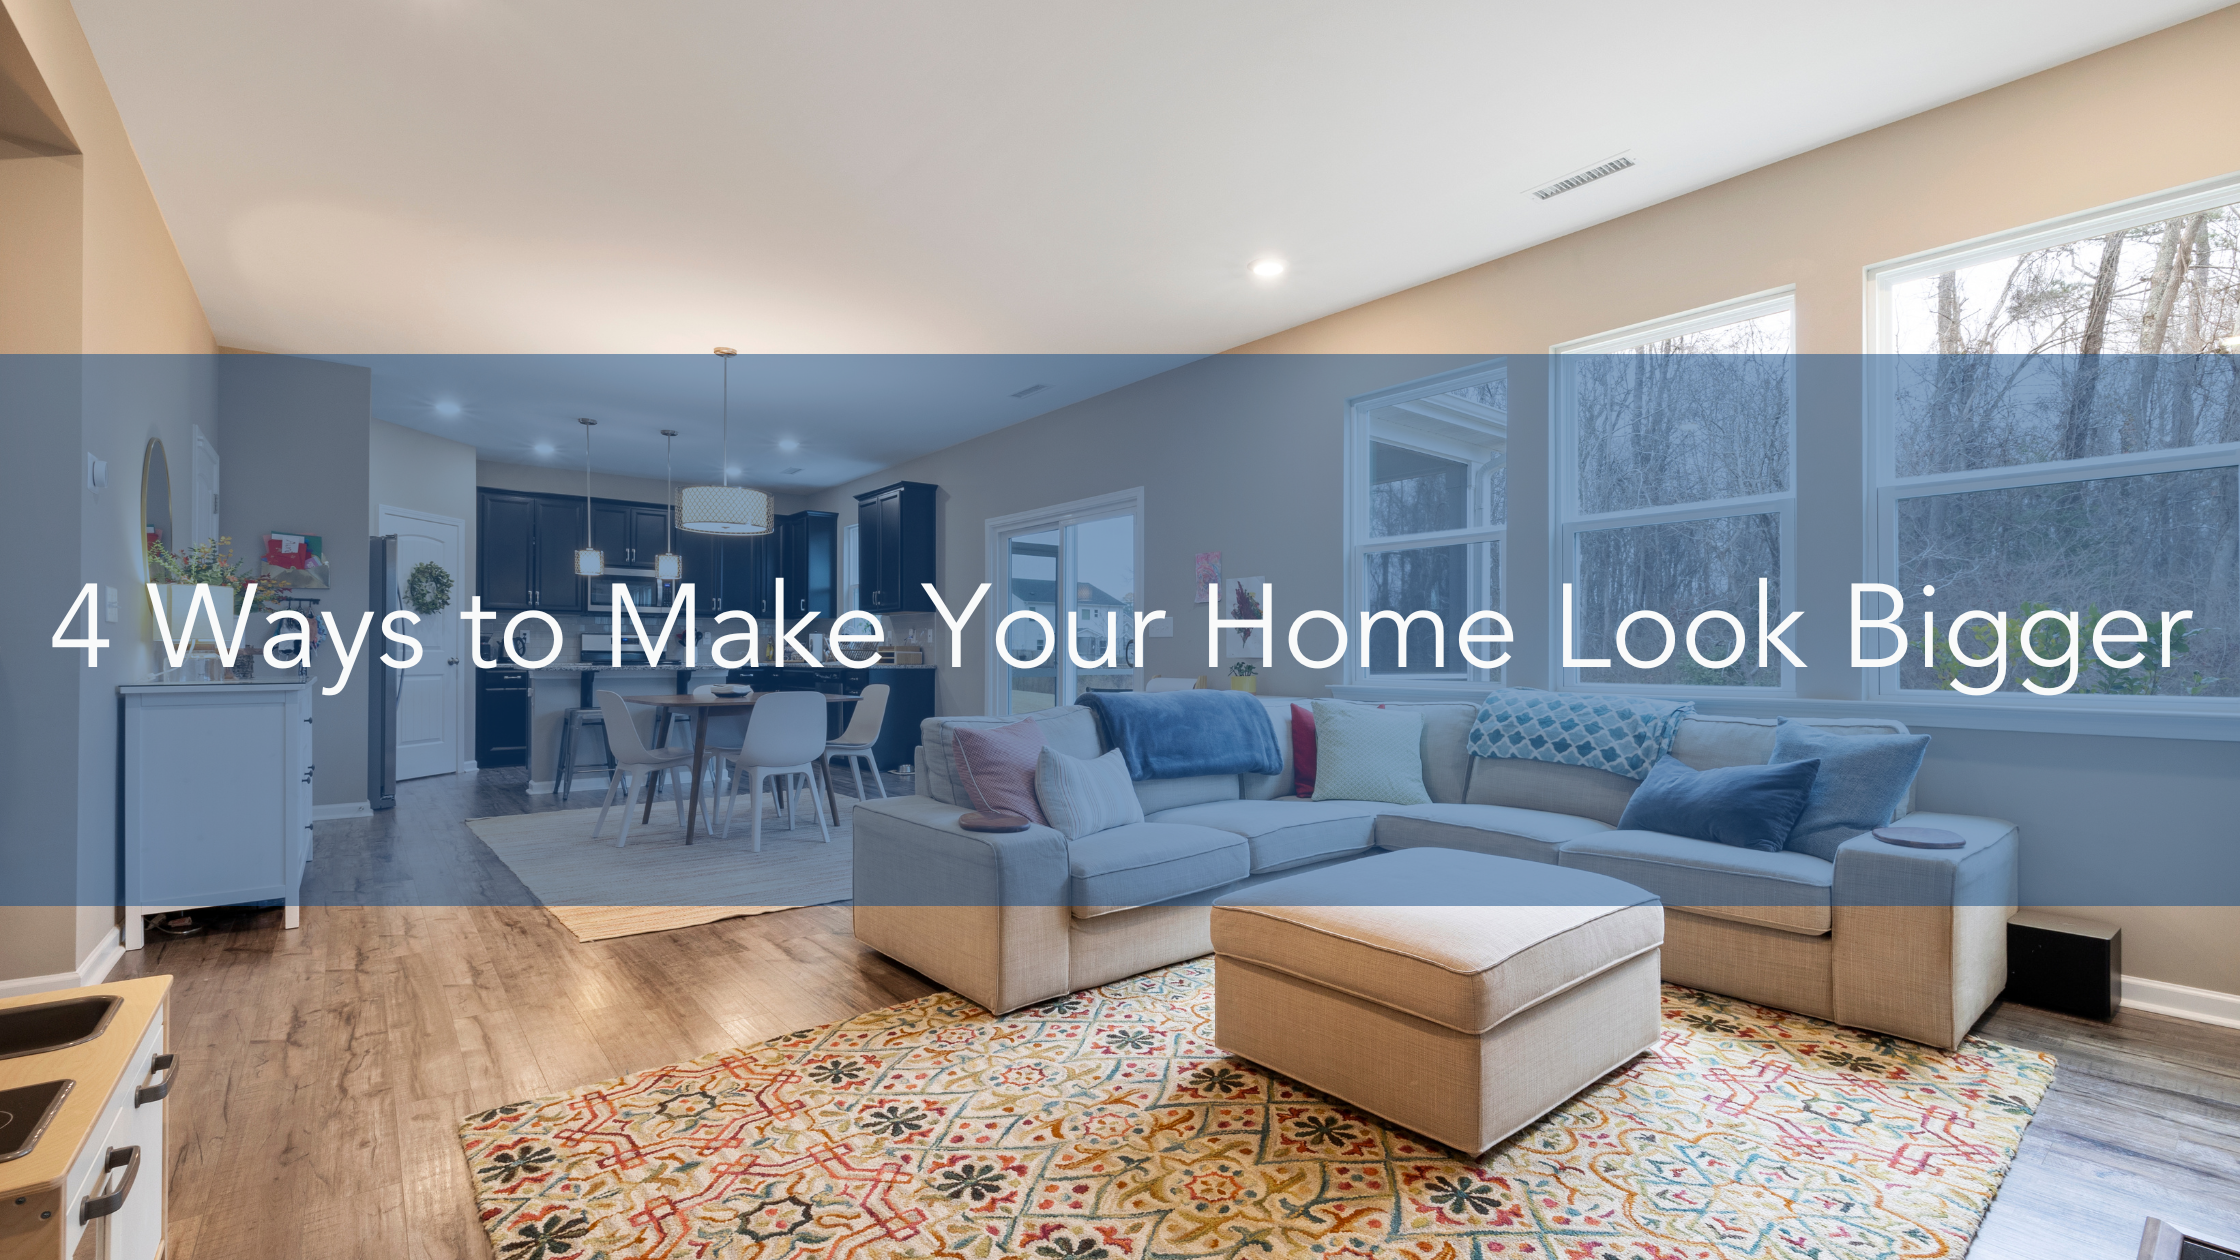 4 Ways to Make Your Home Look Bigger